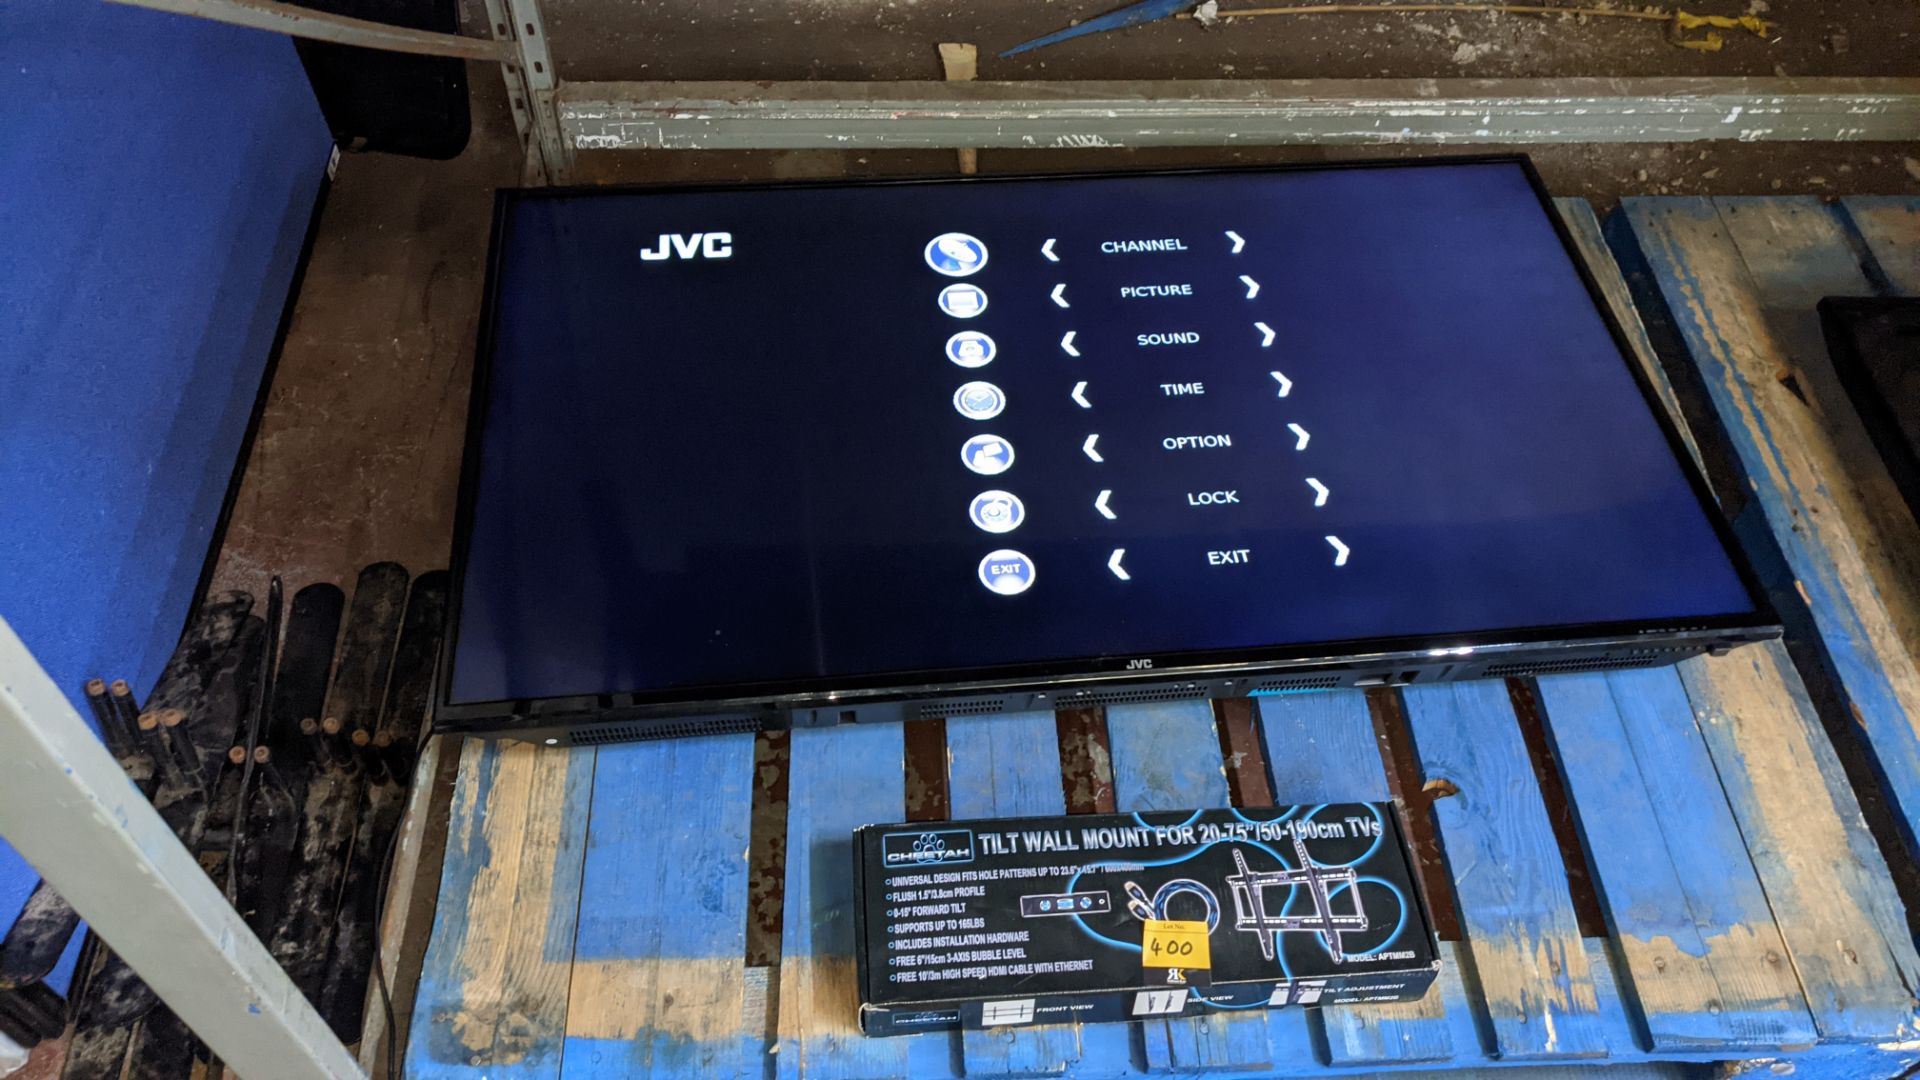 JVC 50" TV including wall-mount, model LT-50C550 - with Remote - Image 8 of 9